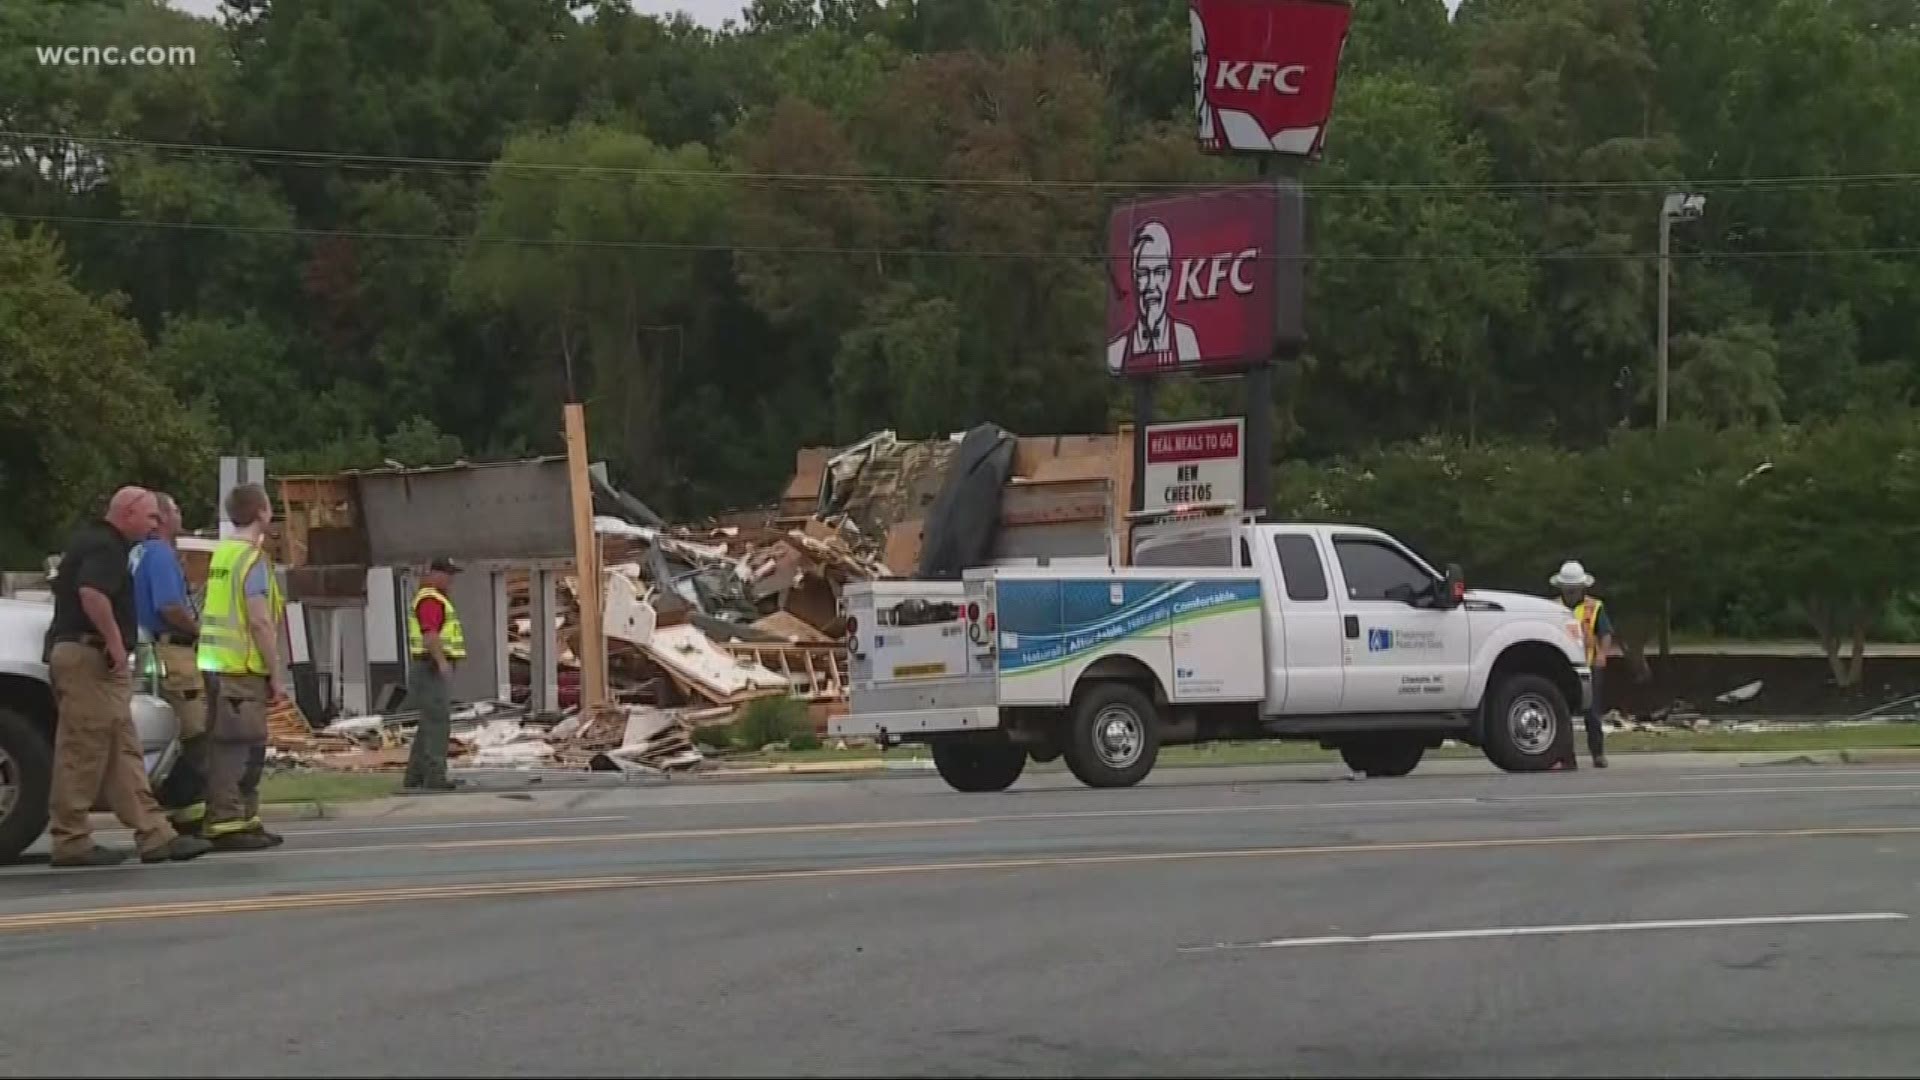 The investigation into an explosion that leveled a KFC restaurant in Eden, North Carolina continues. Police said the blast happened around 12:30 a.m. Thursday morning.